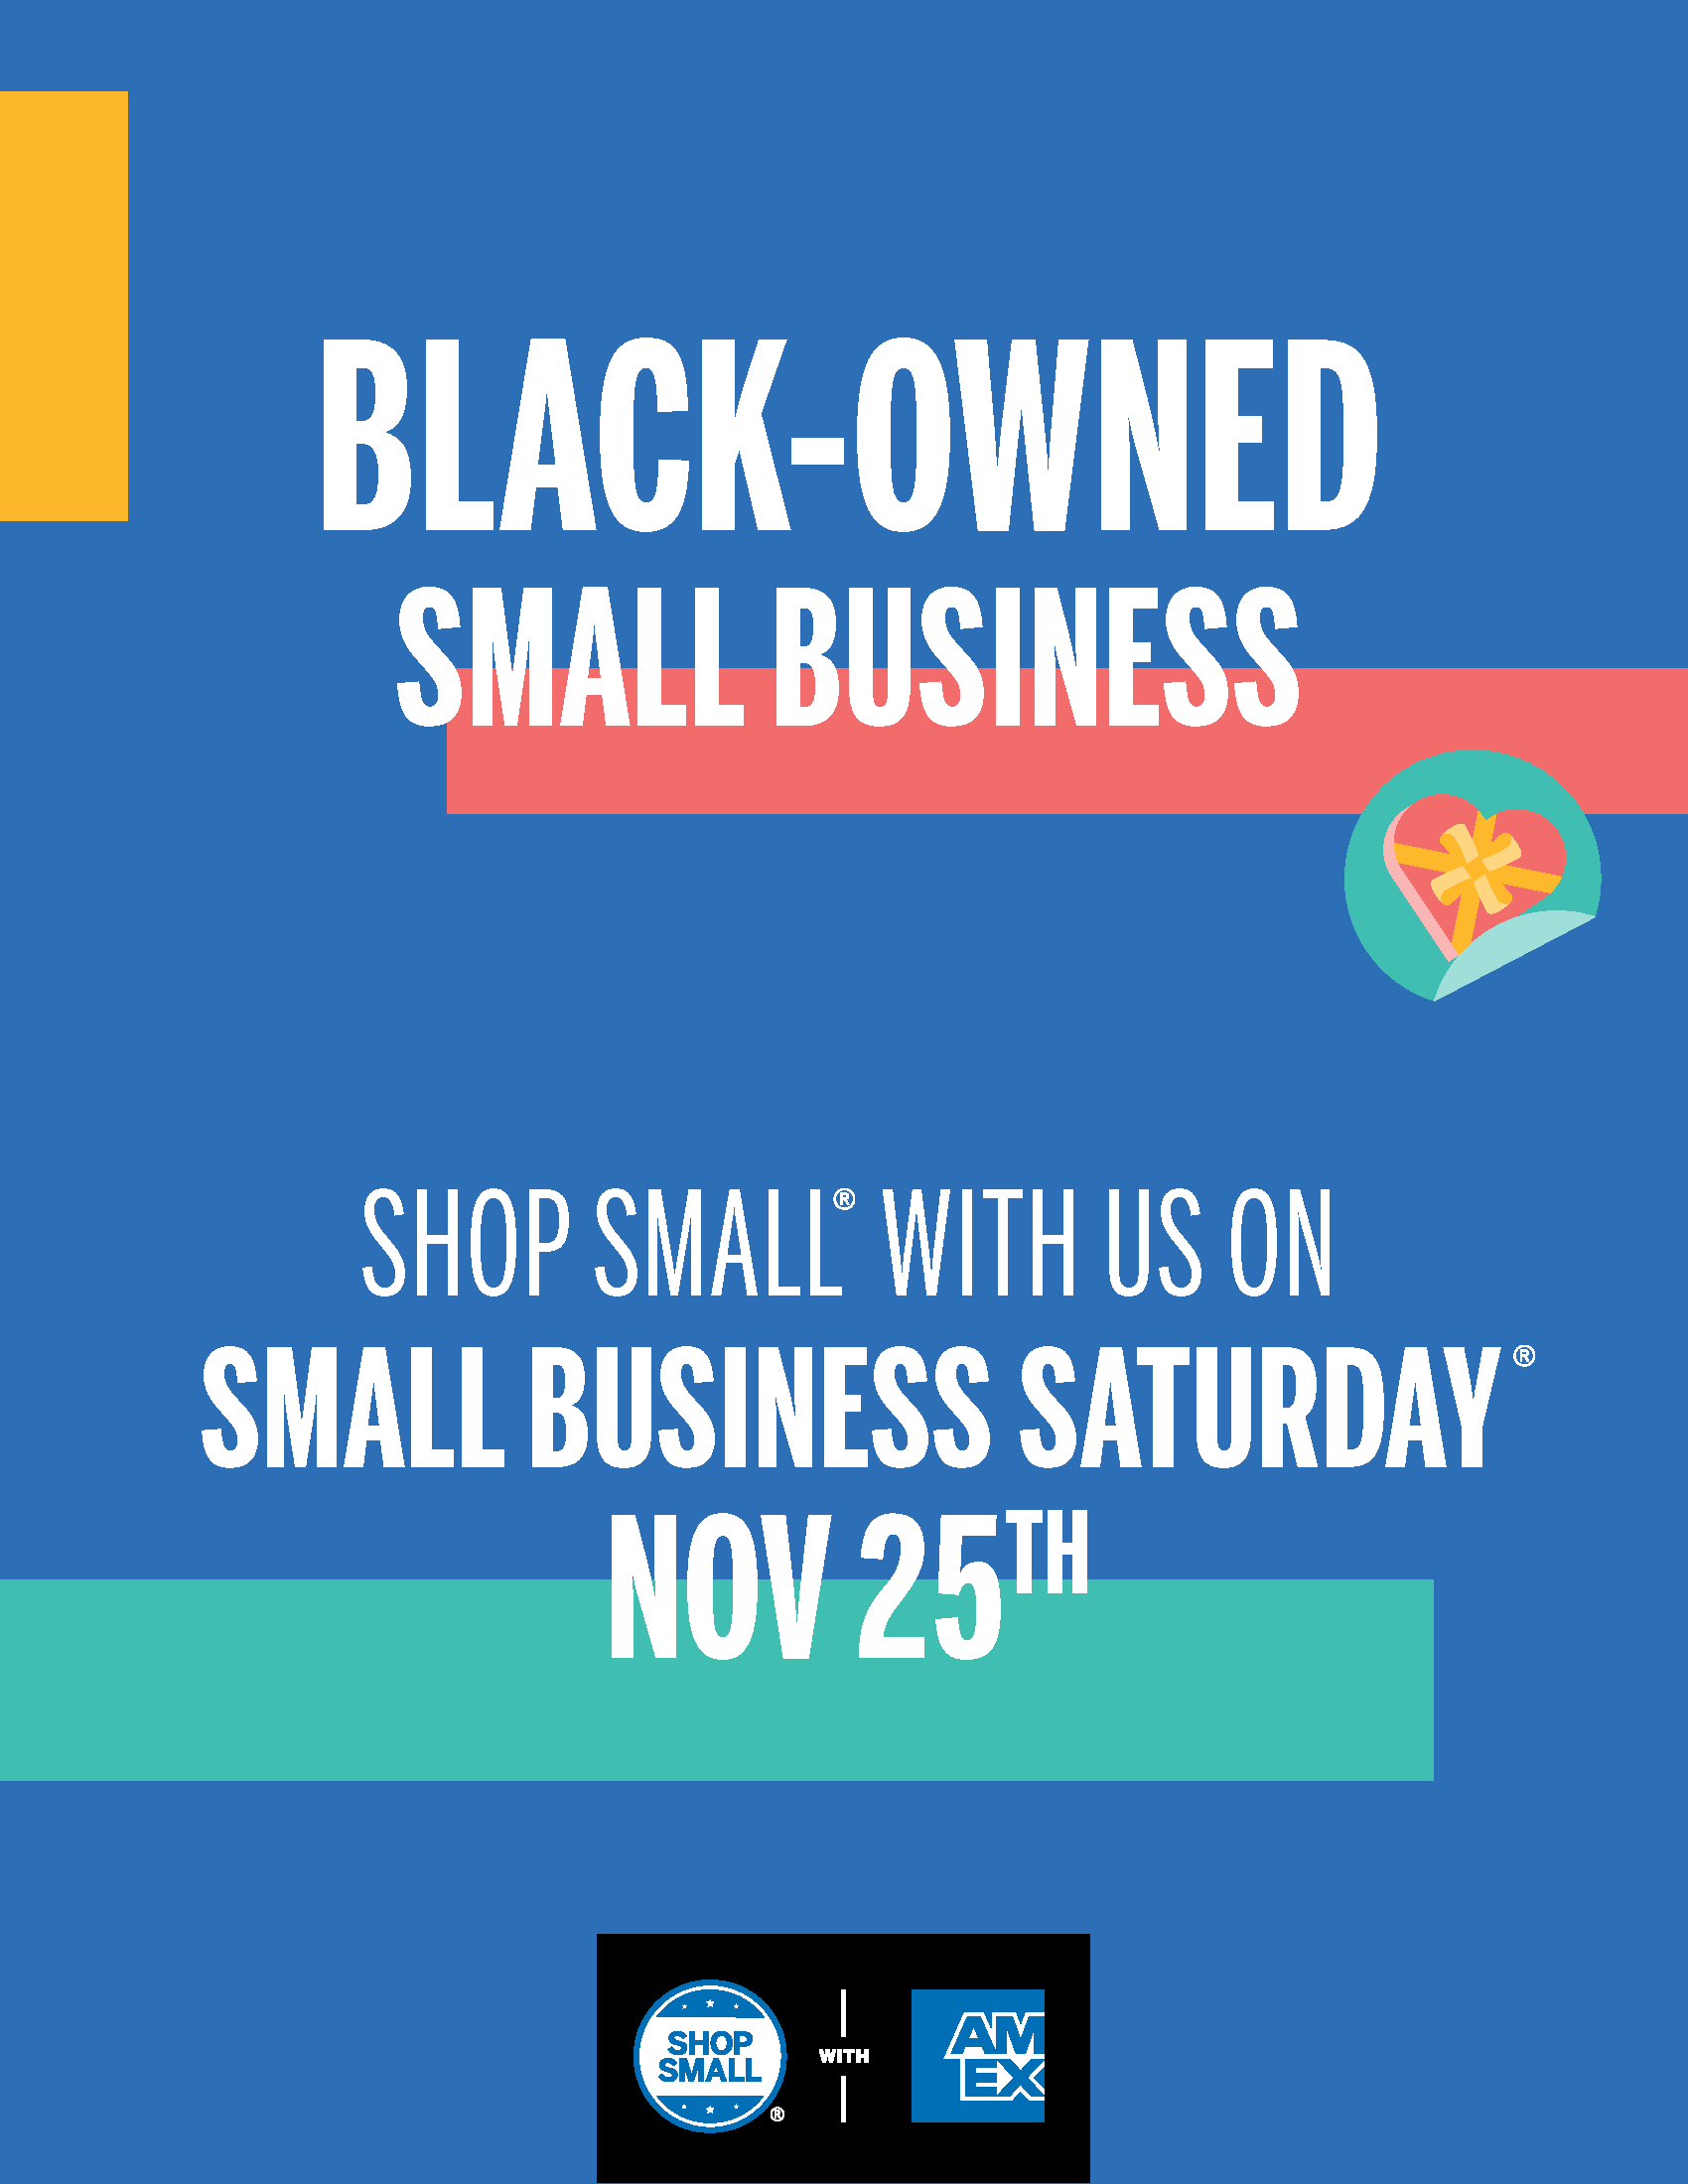 Thumbnail image of Poster PDF that reads Black-Owned Small Business; Shop Small with us on Small Business Saturday Nov 25th and includes the Shop Small with Amex logo